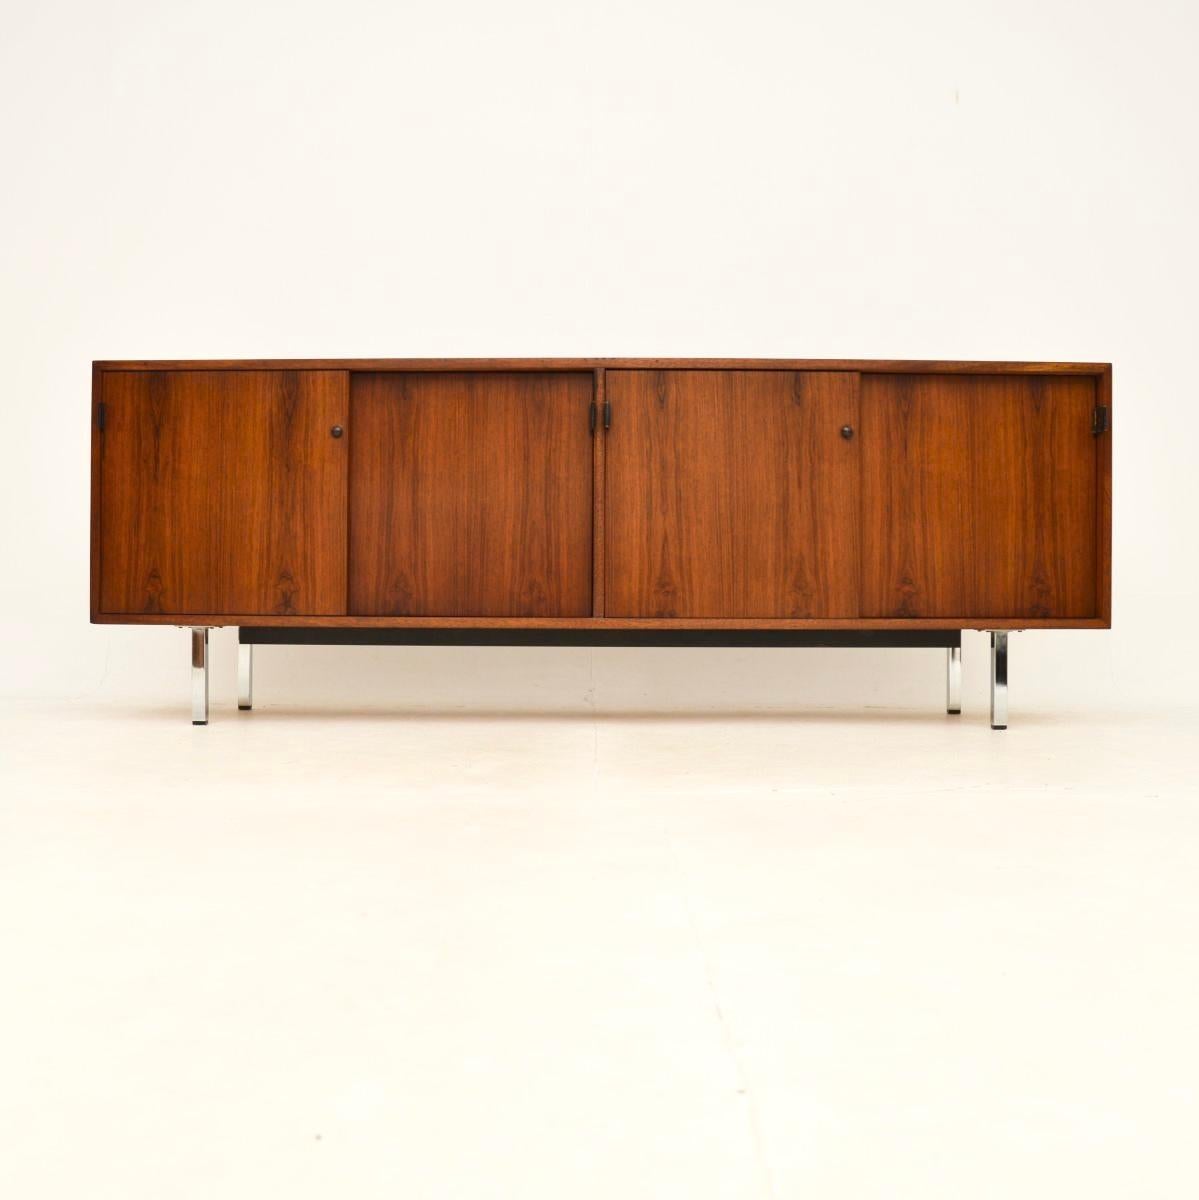 A stylish and extremely well made vintage sideboard by Florence Knoll. It was made by Knoll International, it dates from around the 1960-70’s.

It is of superb quality, beautifully crafted with chrome legs and a sycamore interior. This has gorgeous